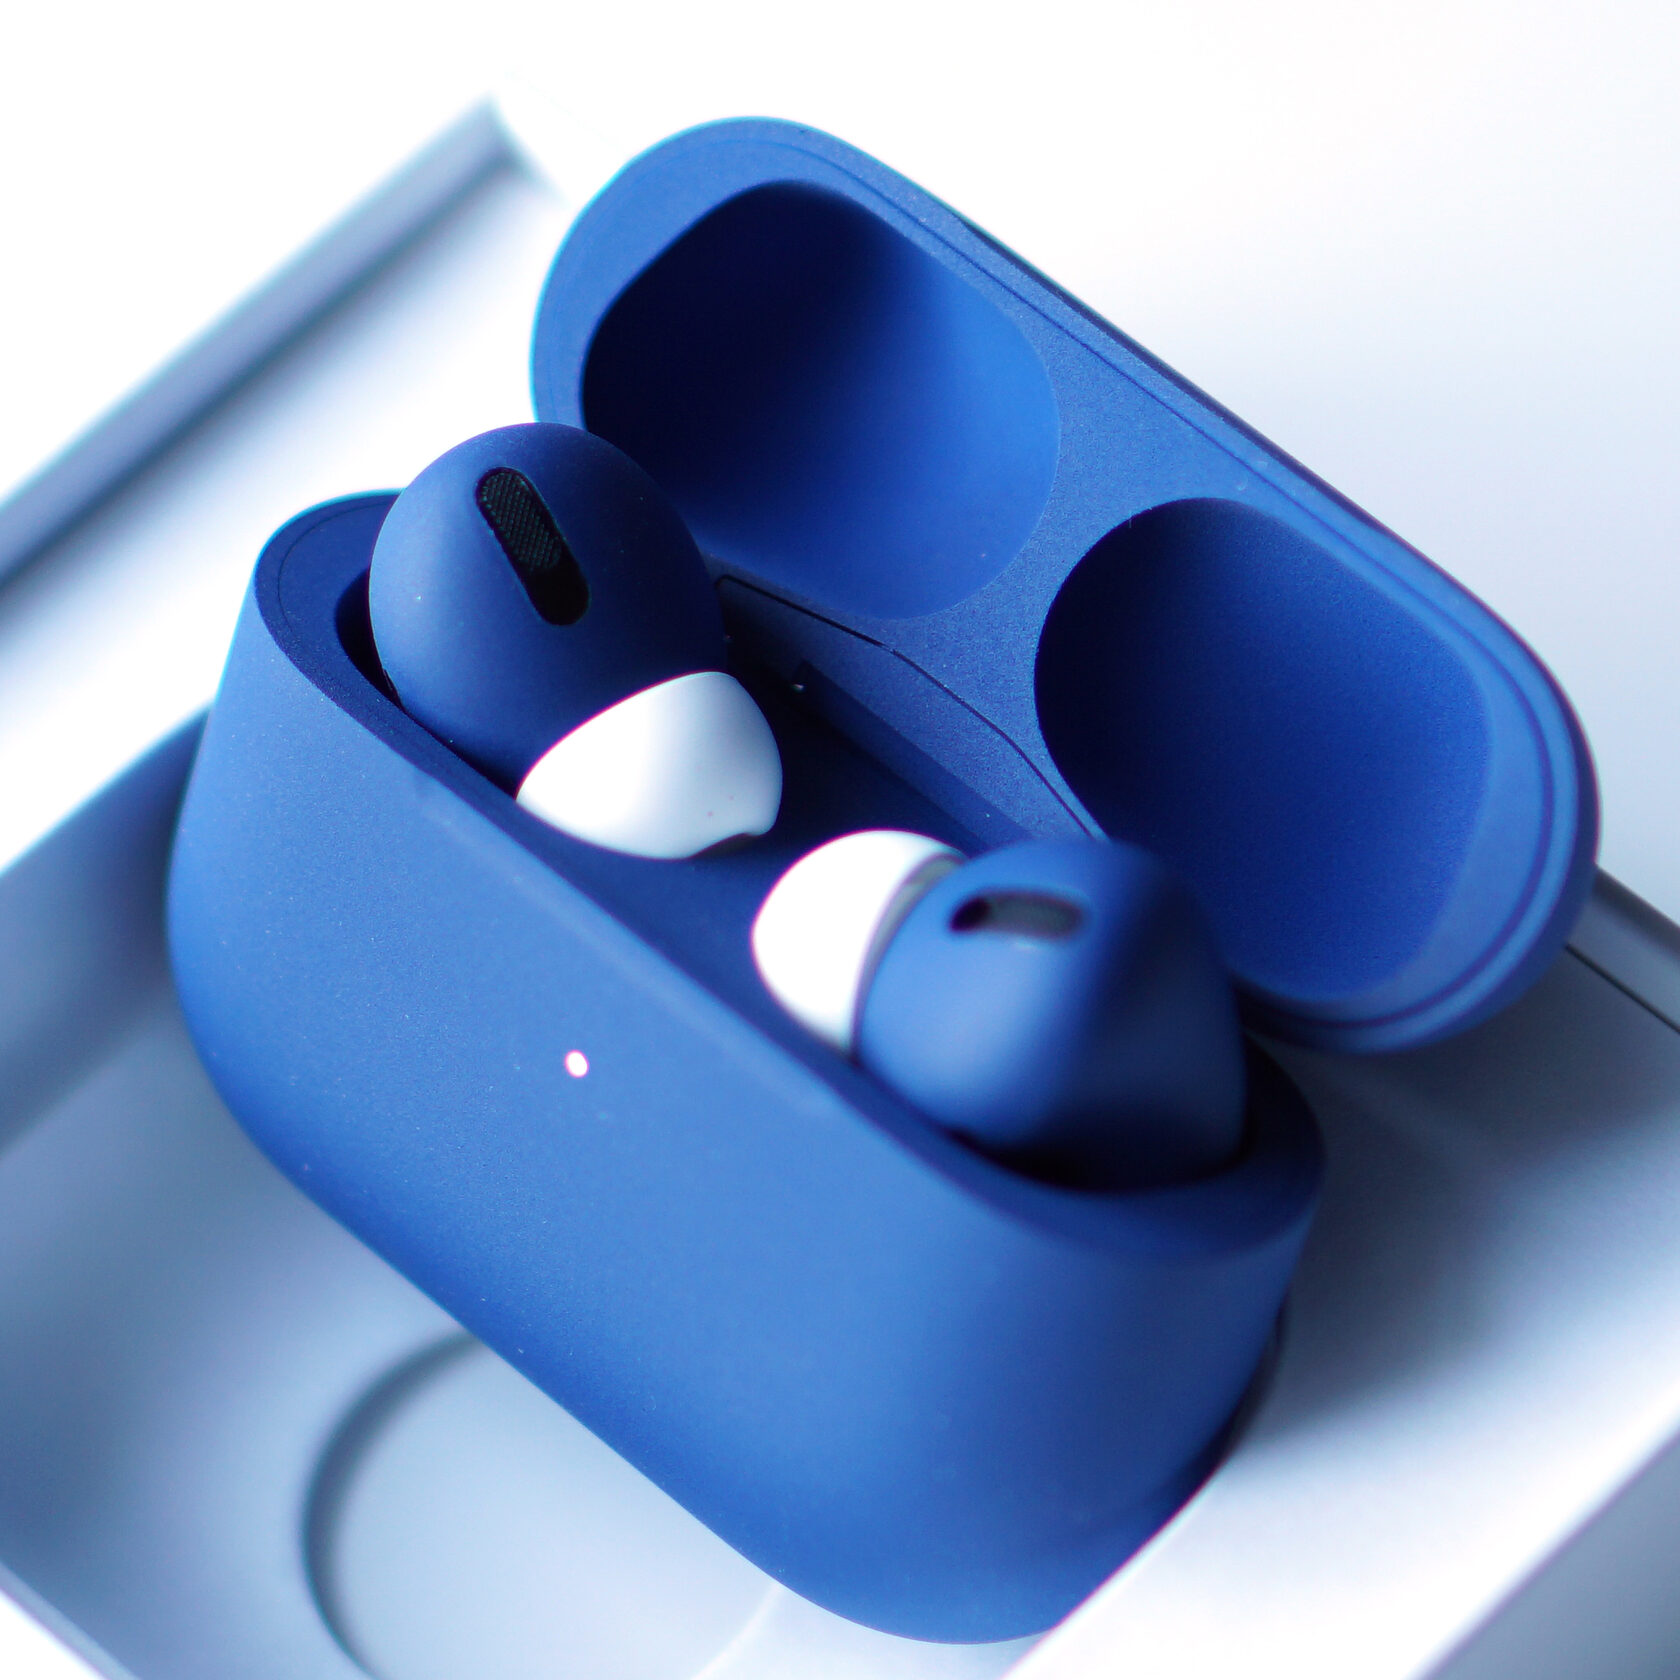 AIRPODS Pro 2. Аирподсы 3. AIRPODS Pro 3. AIRPODS Pro 2 Blue.